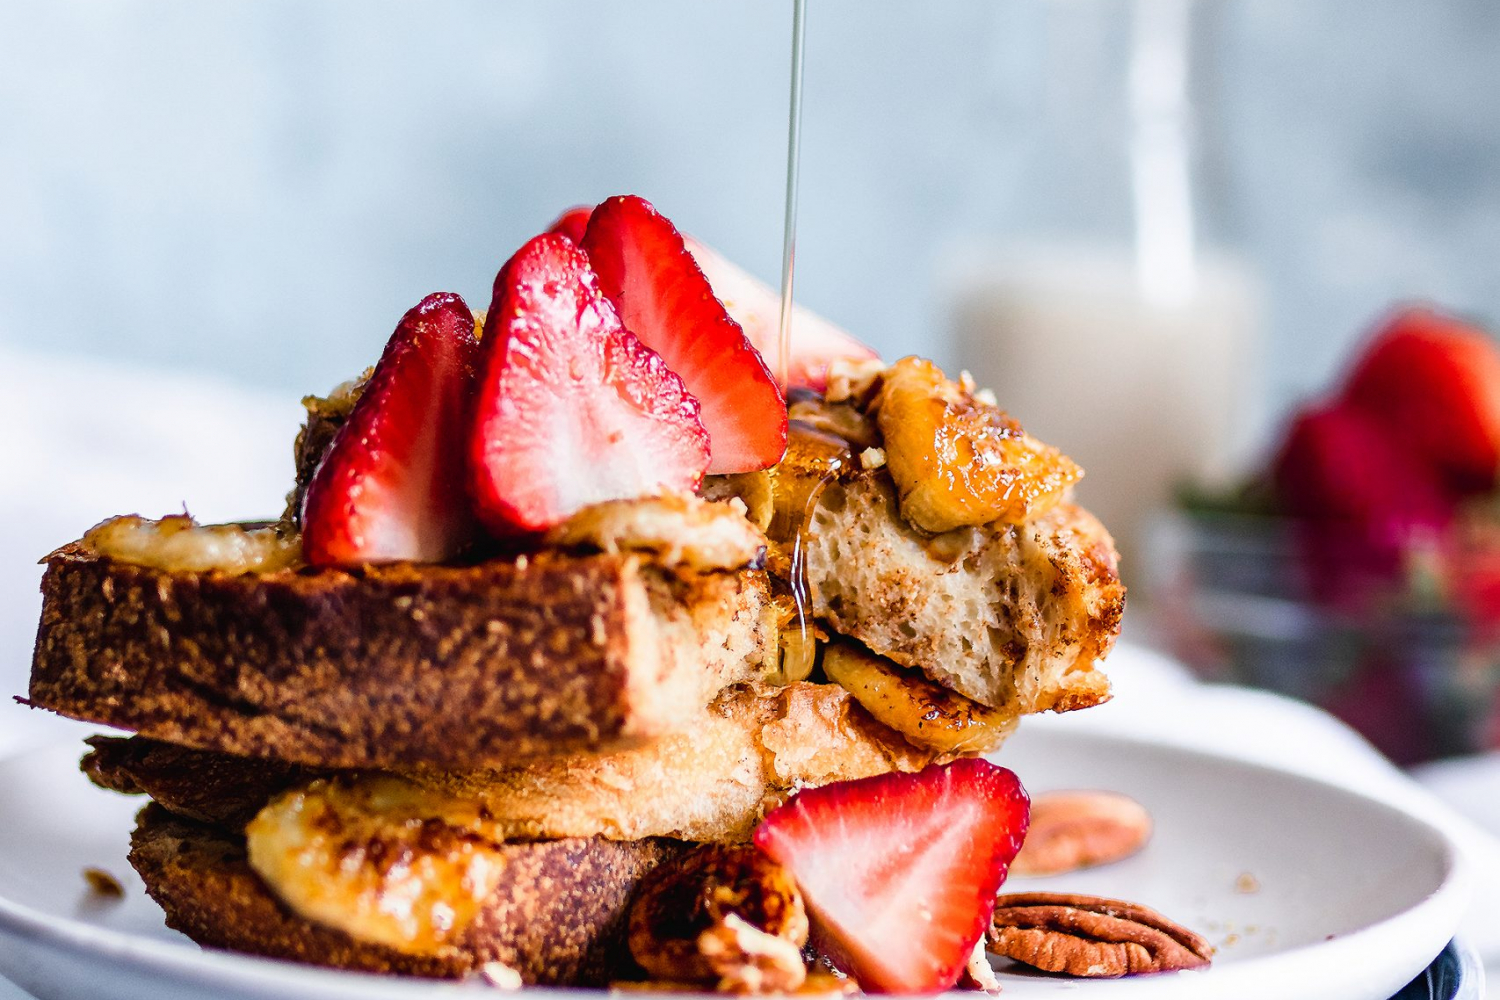 Maple syrup being poured onto a stack of vegan French toast served with caramelized bananas, strawberries, and pecans